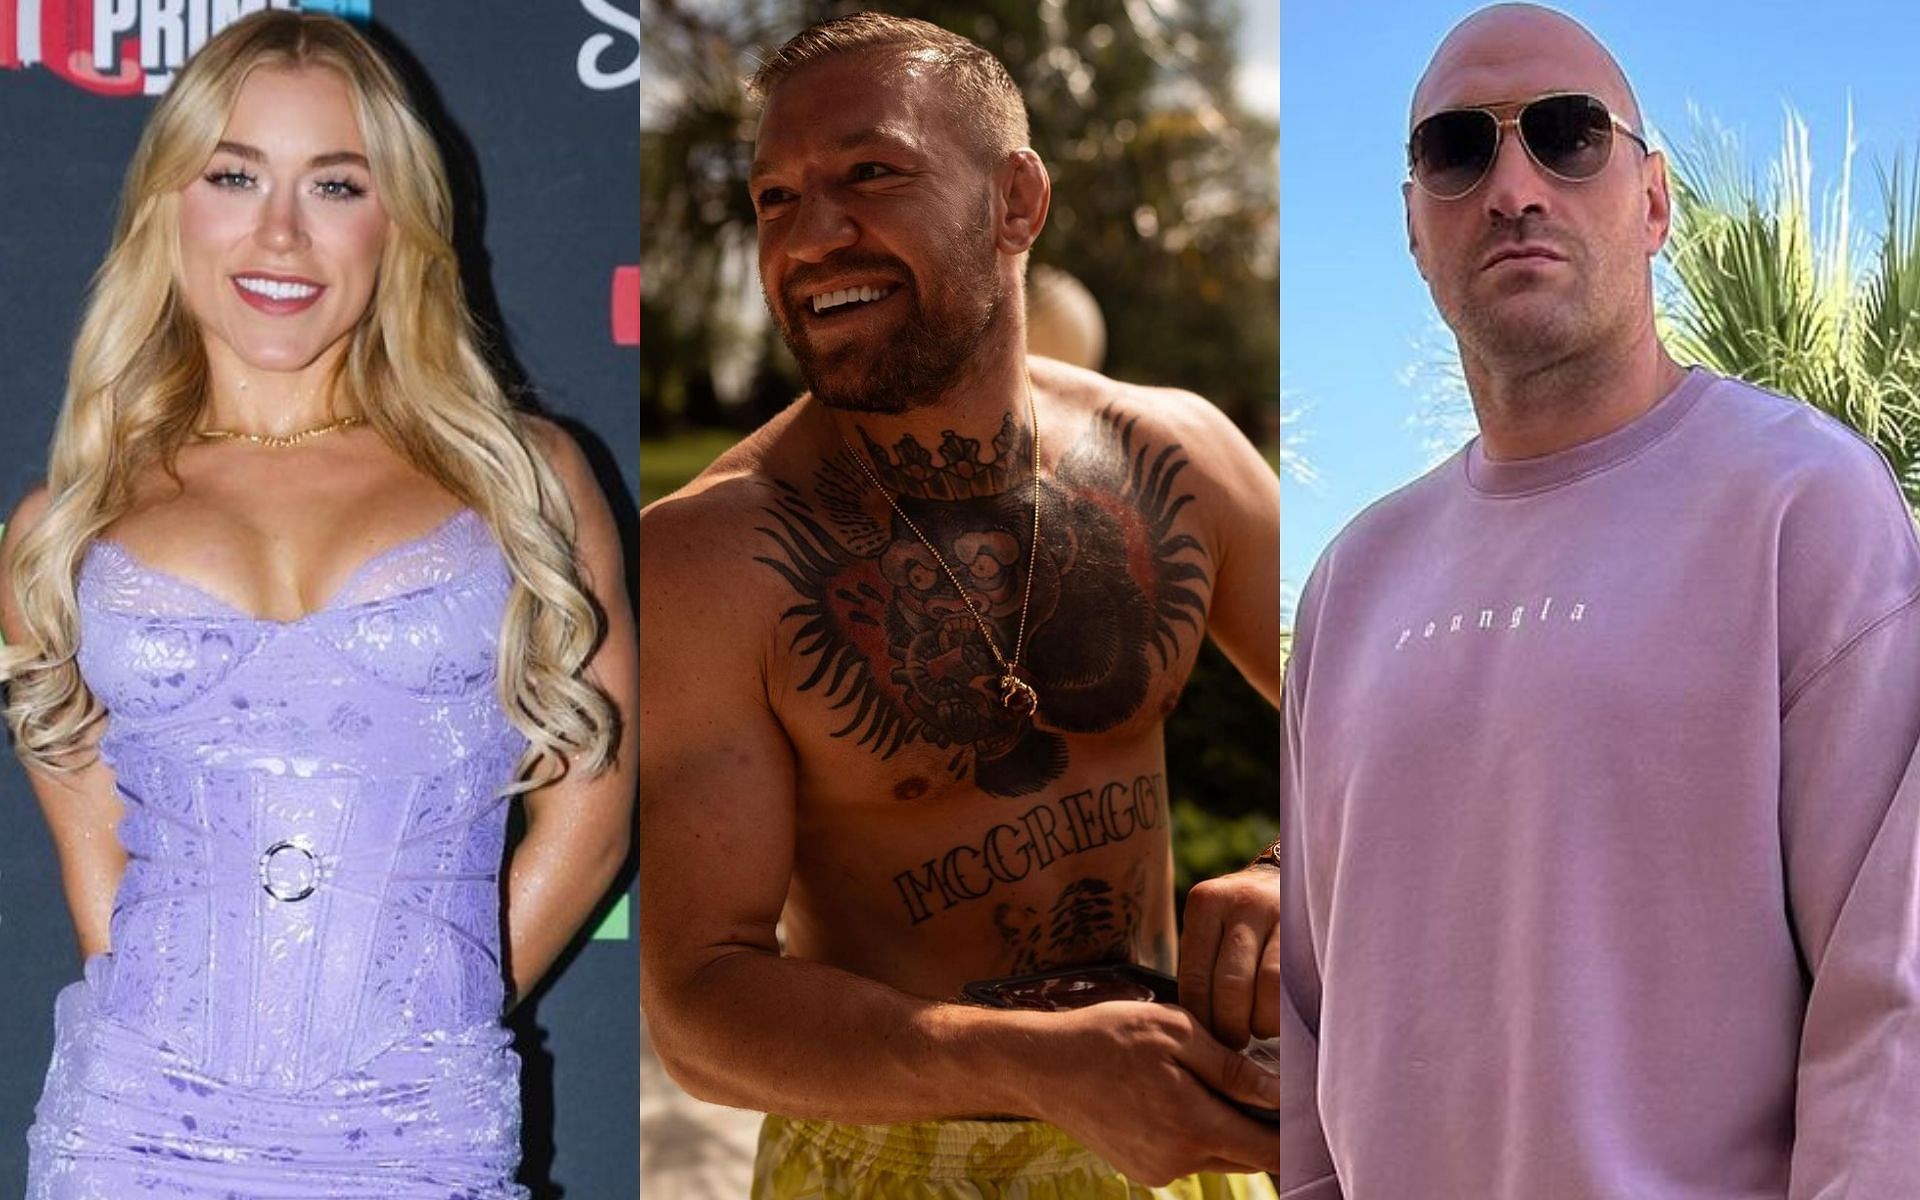 When Elle Brooke discussed emulating trash-talking styles of Conor McGregor and Tyson Fury